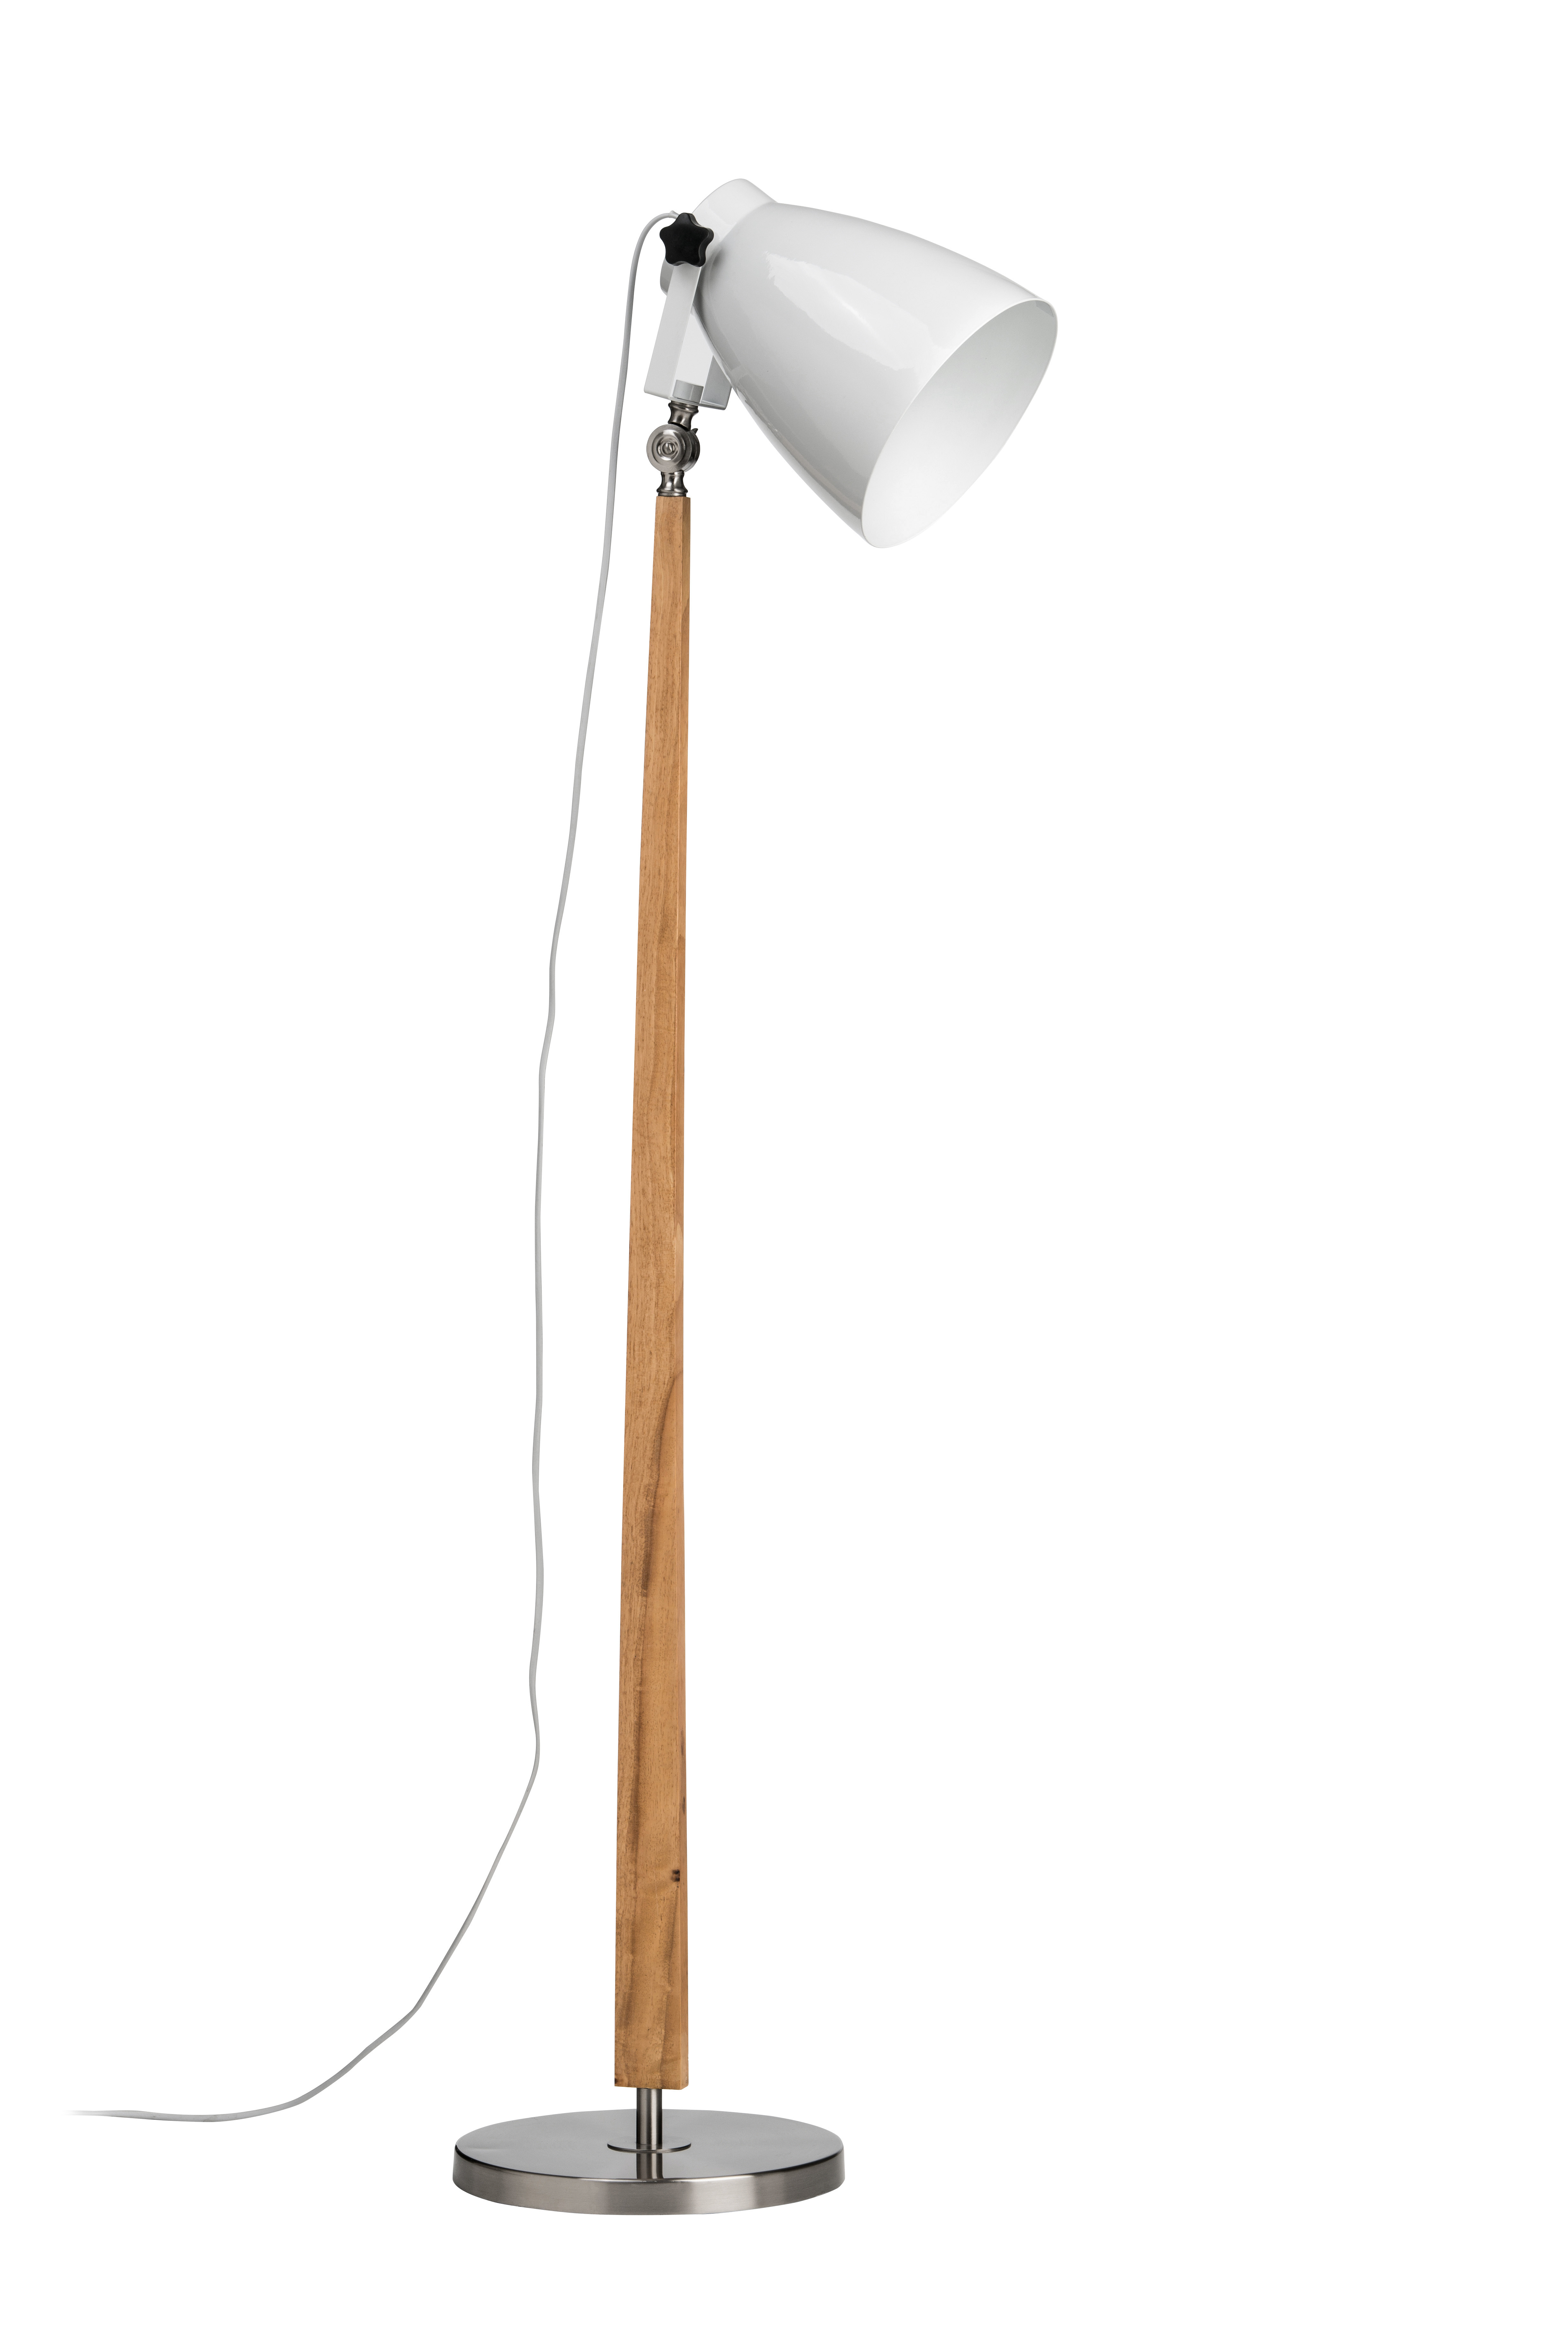 Stockholm Floor Lamp With Eu Plug pertaining to sizing 4912 X 7360